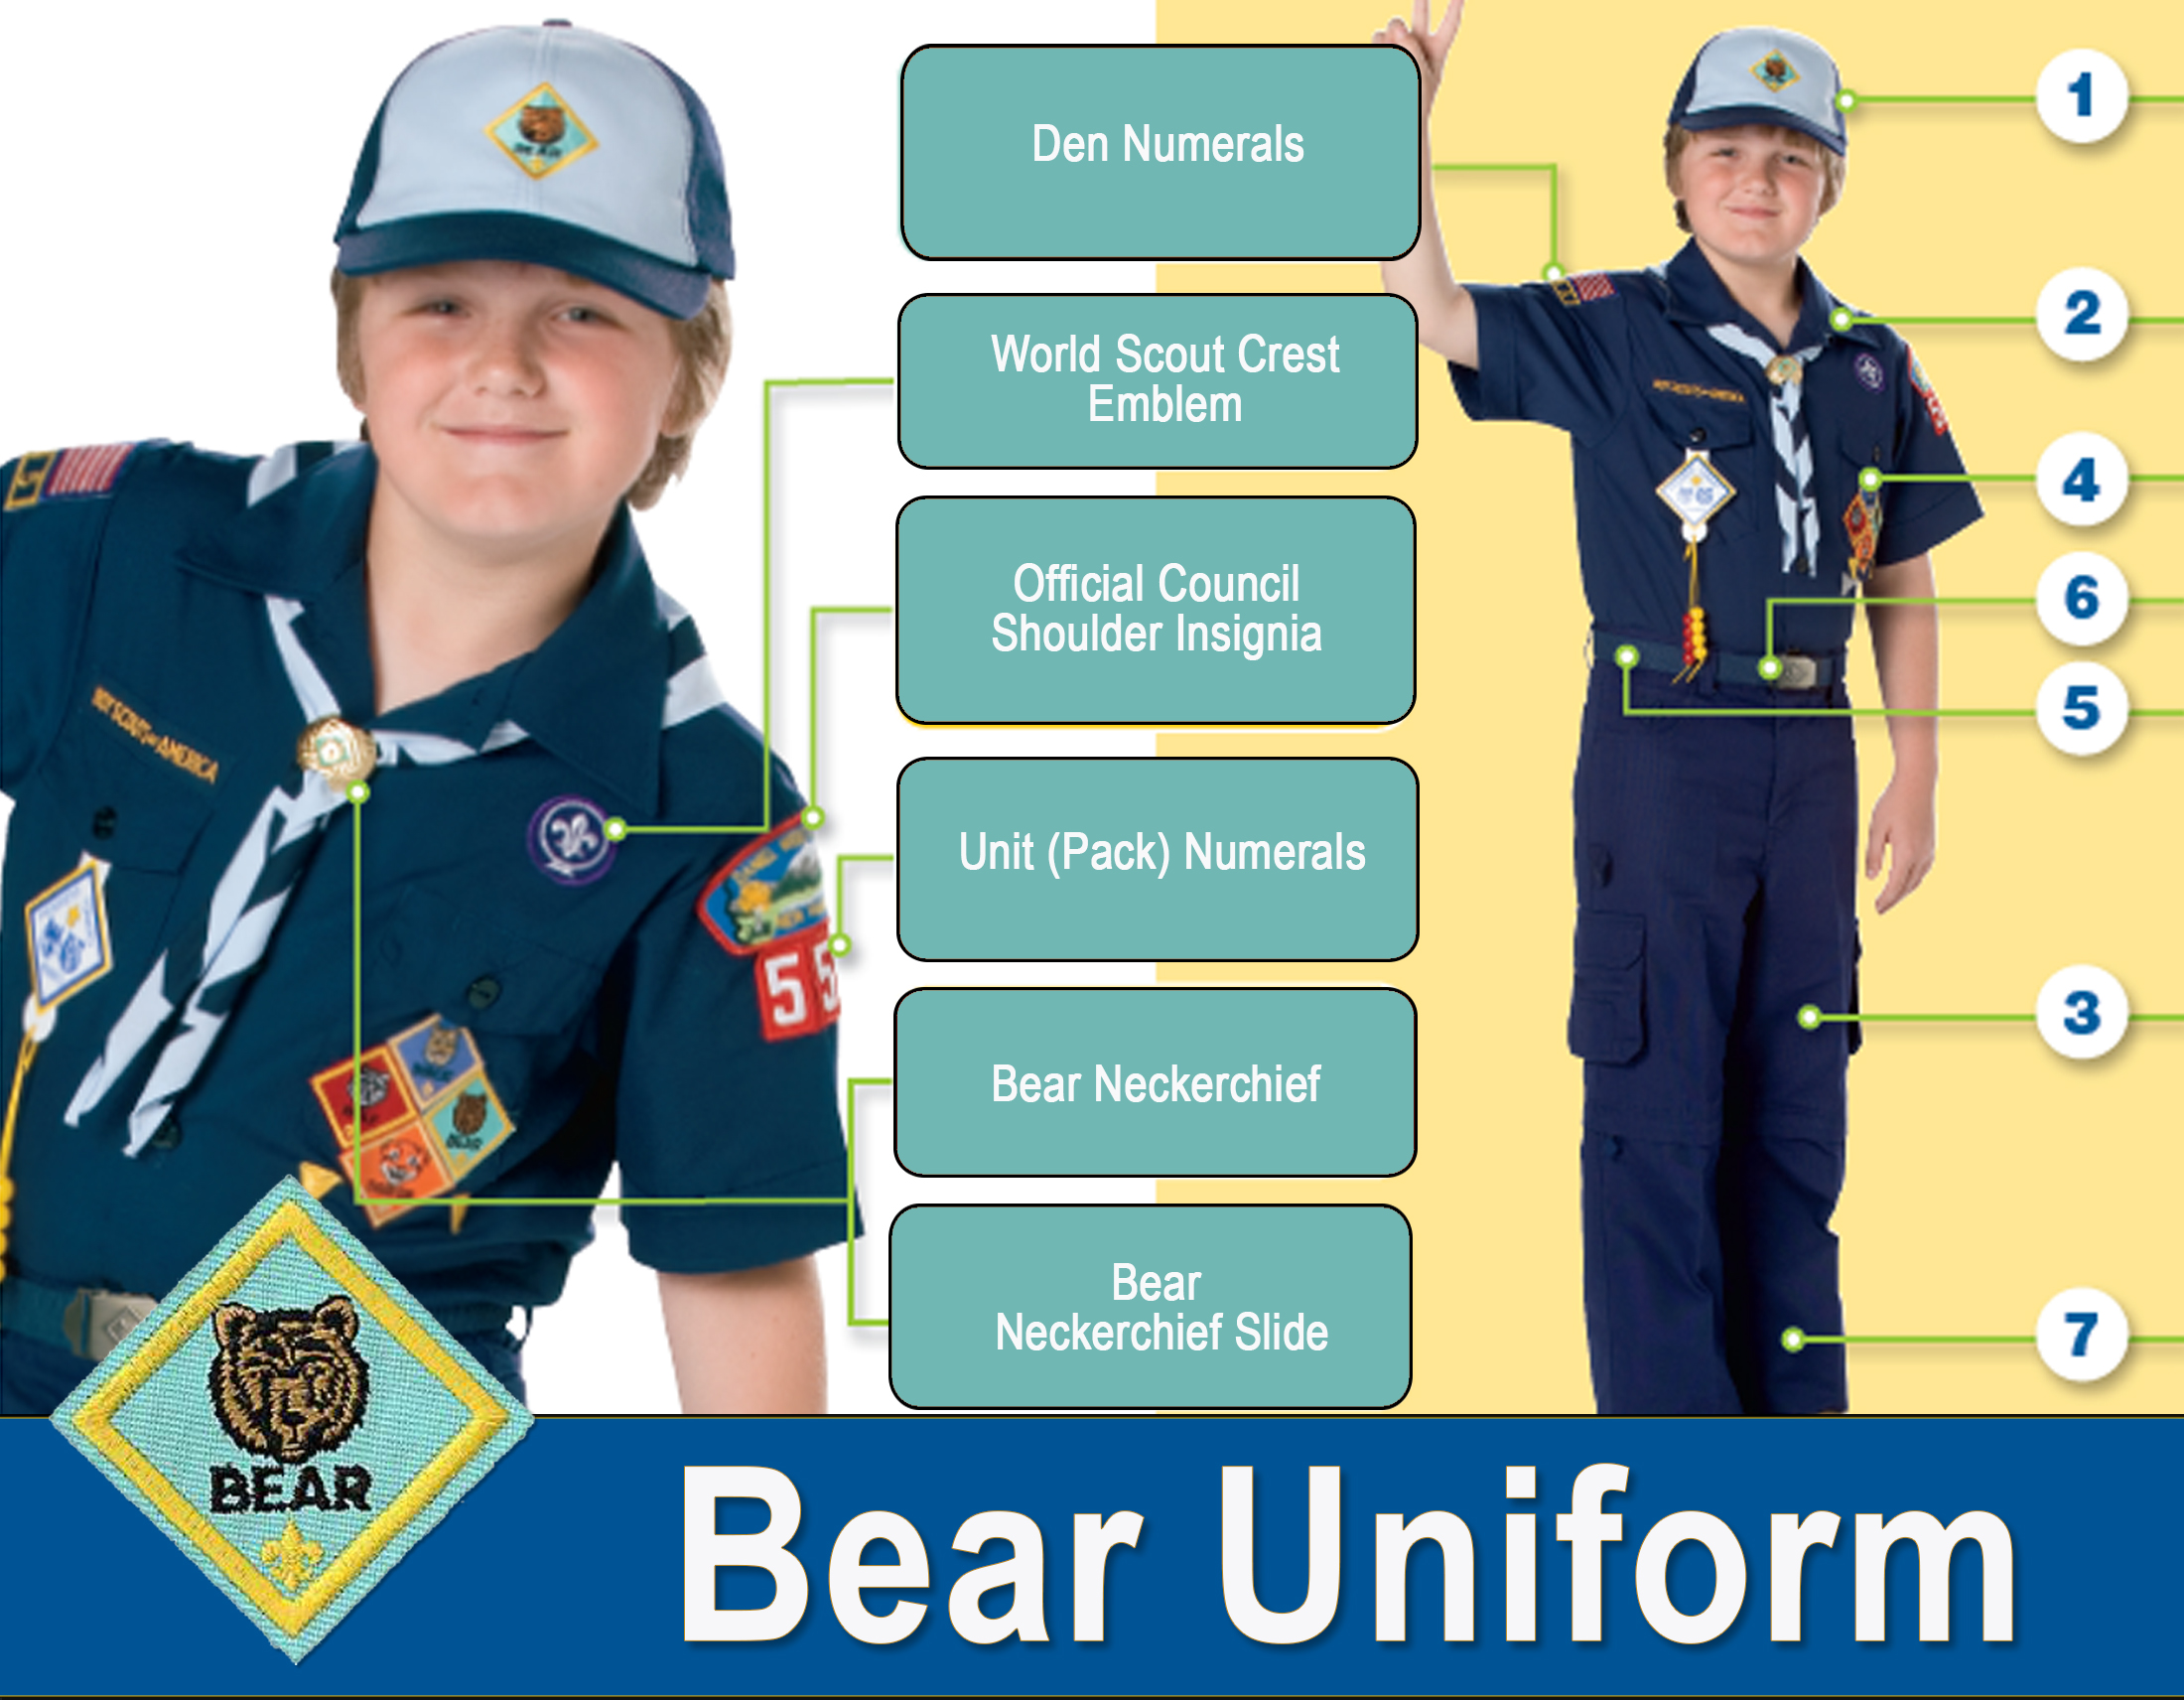 Where To Buy Cub Scout Uniform 21